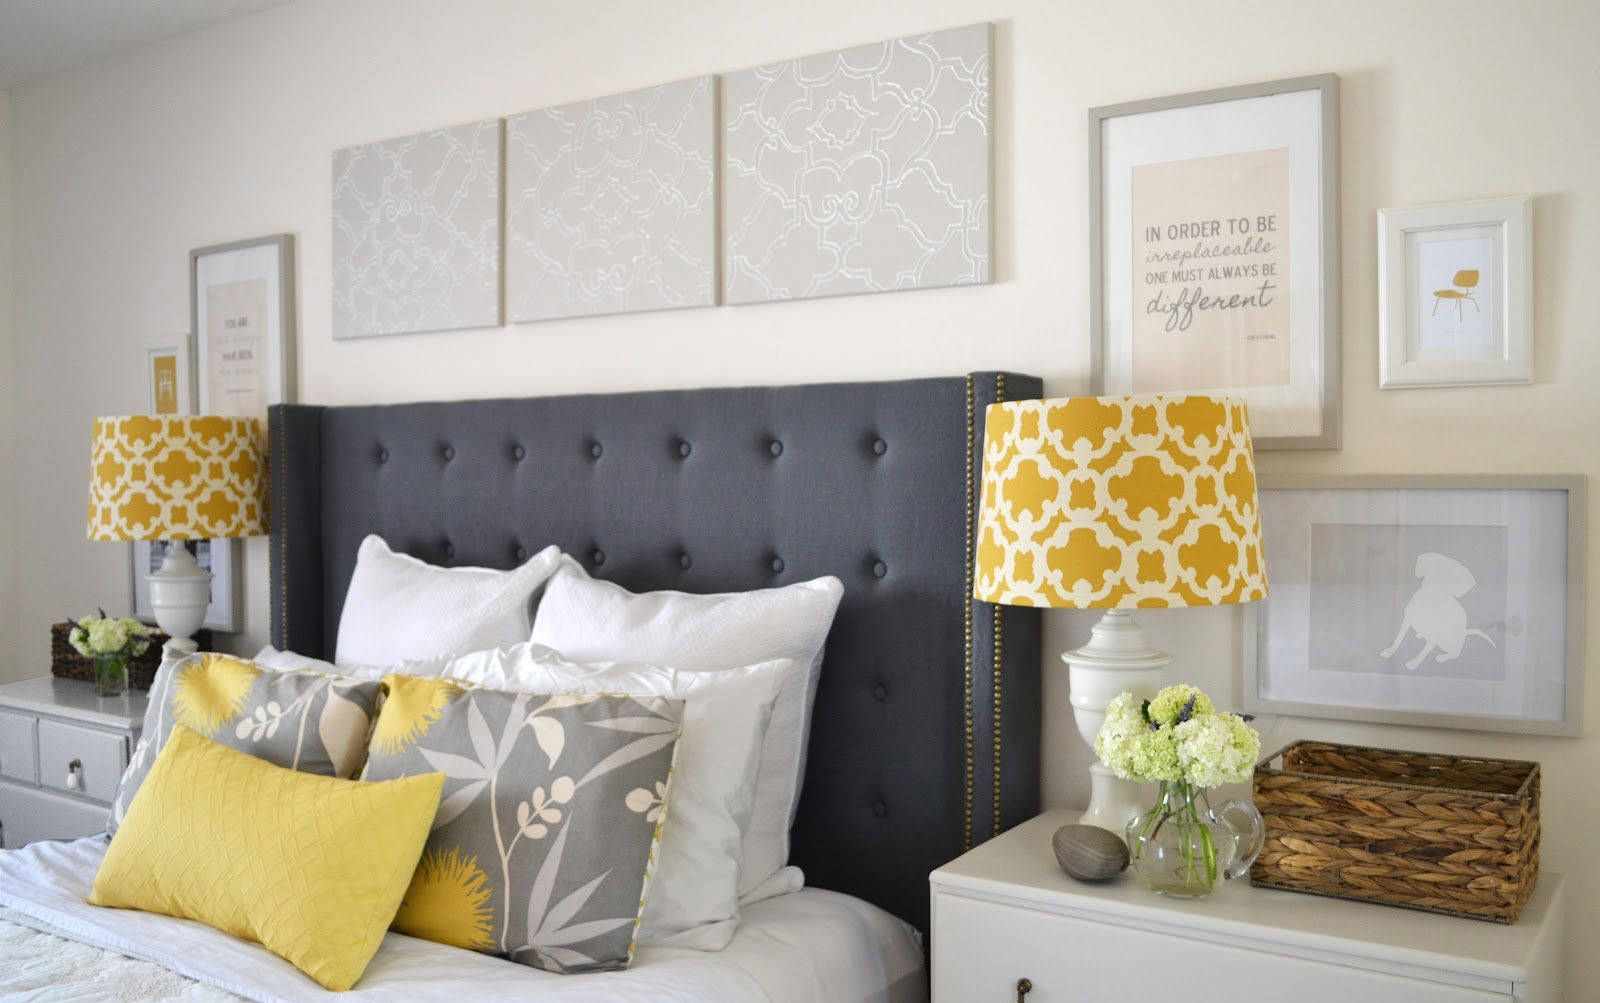 example of a vibrant headboard style